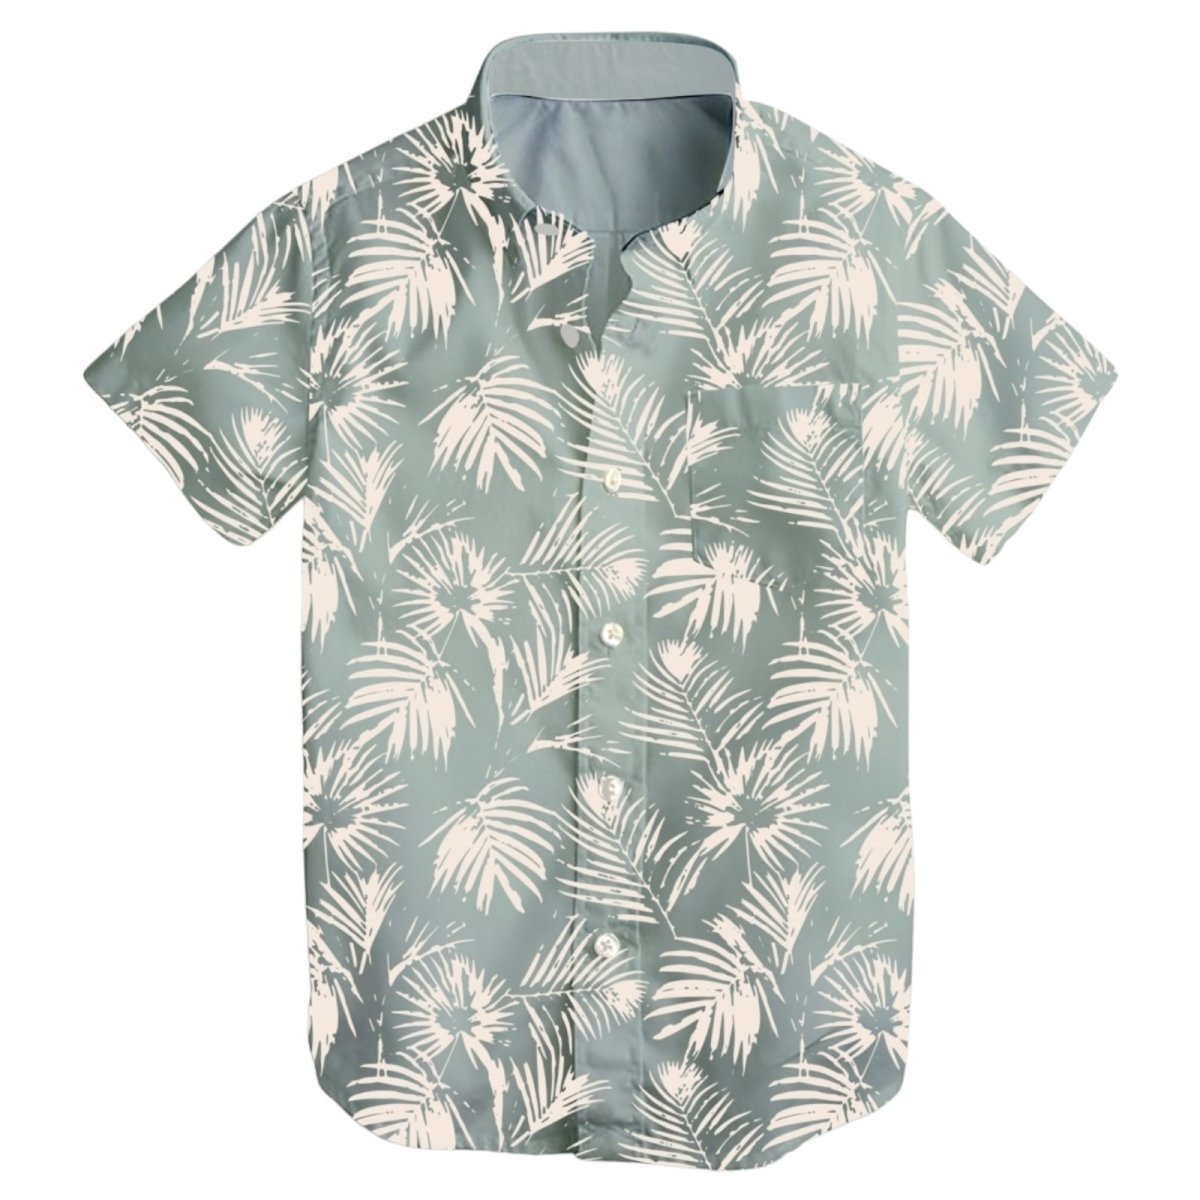 PARADISE BUTTON UP TOP - TINY WHALES